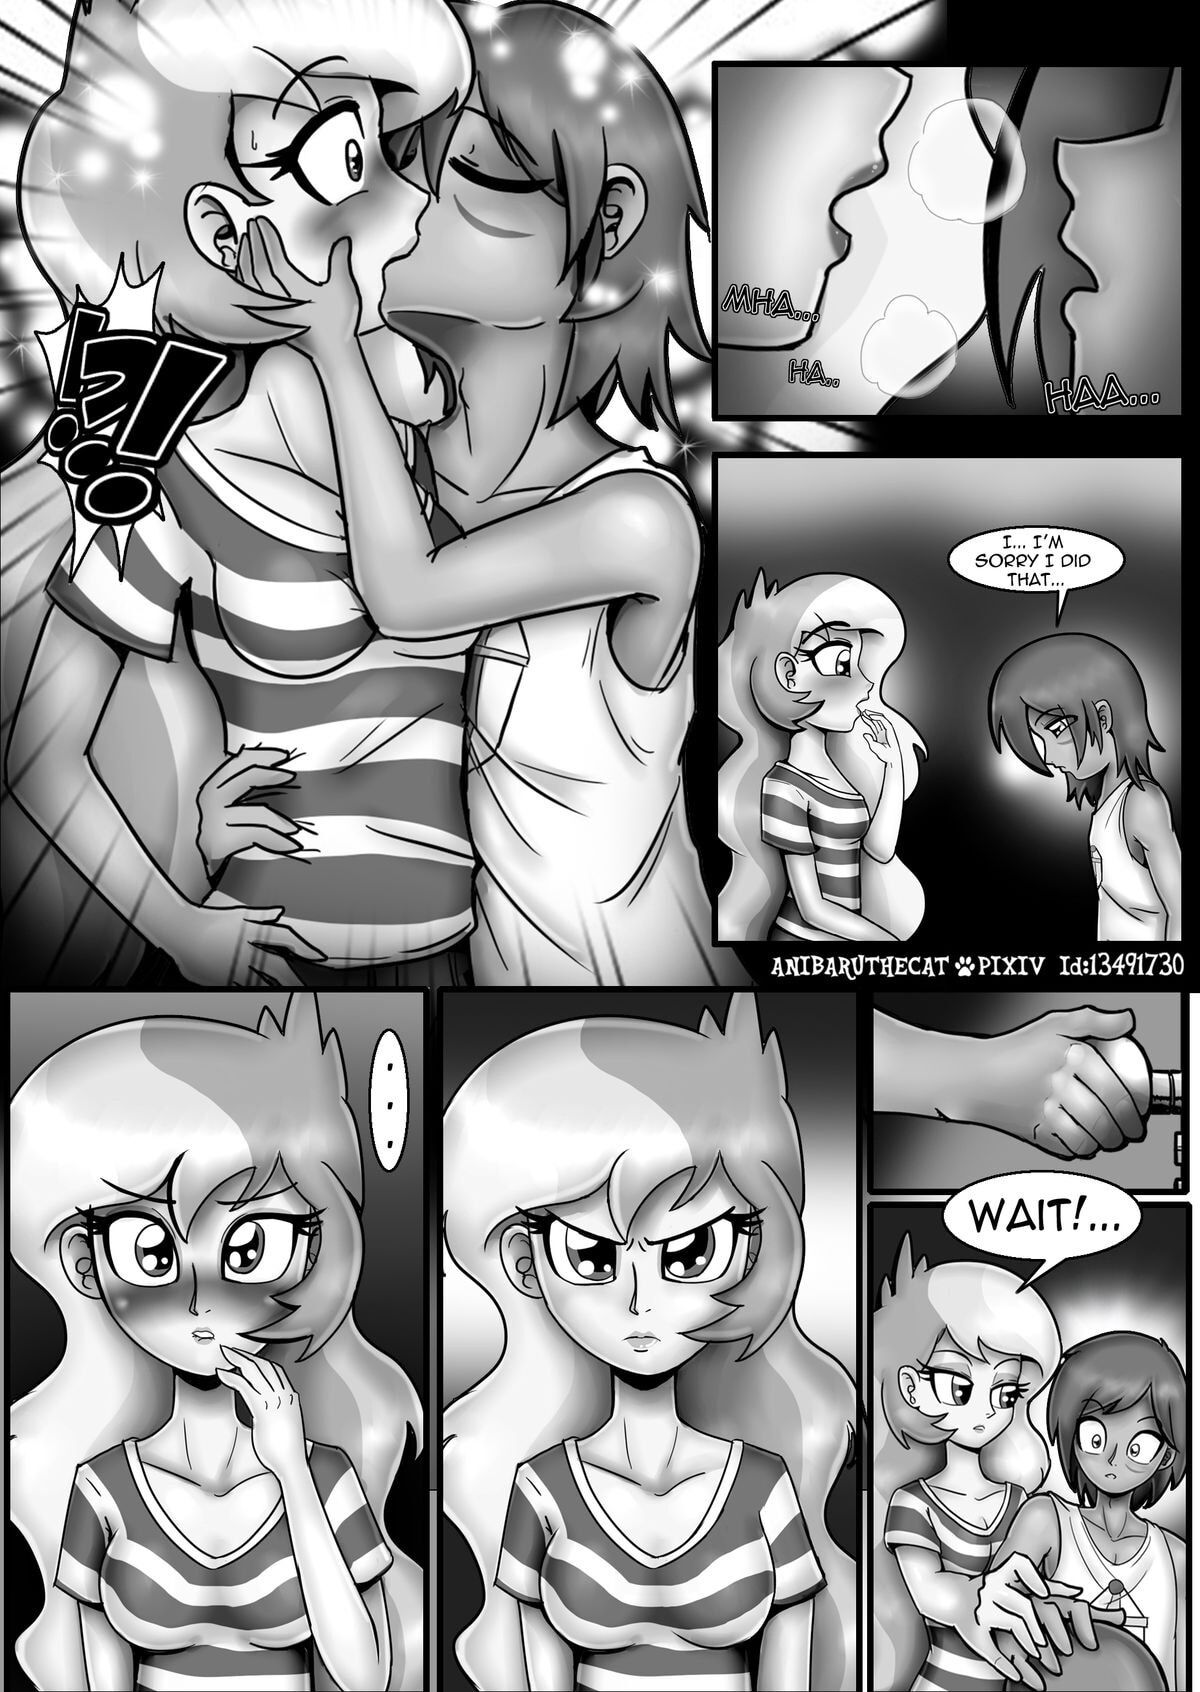 Boys will be Boys - Page 5